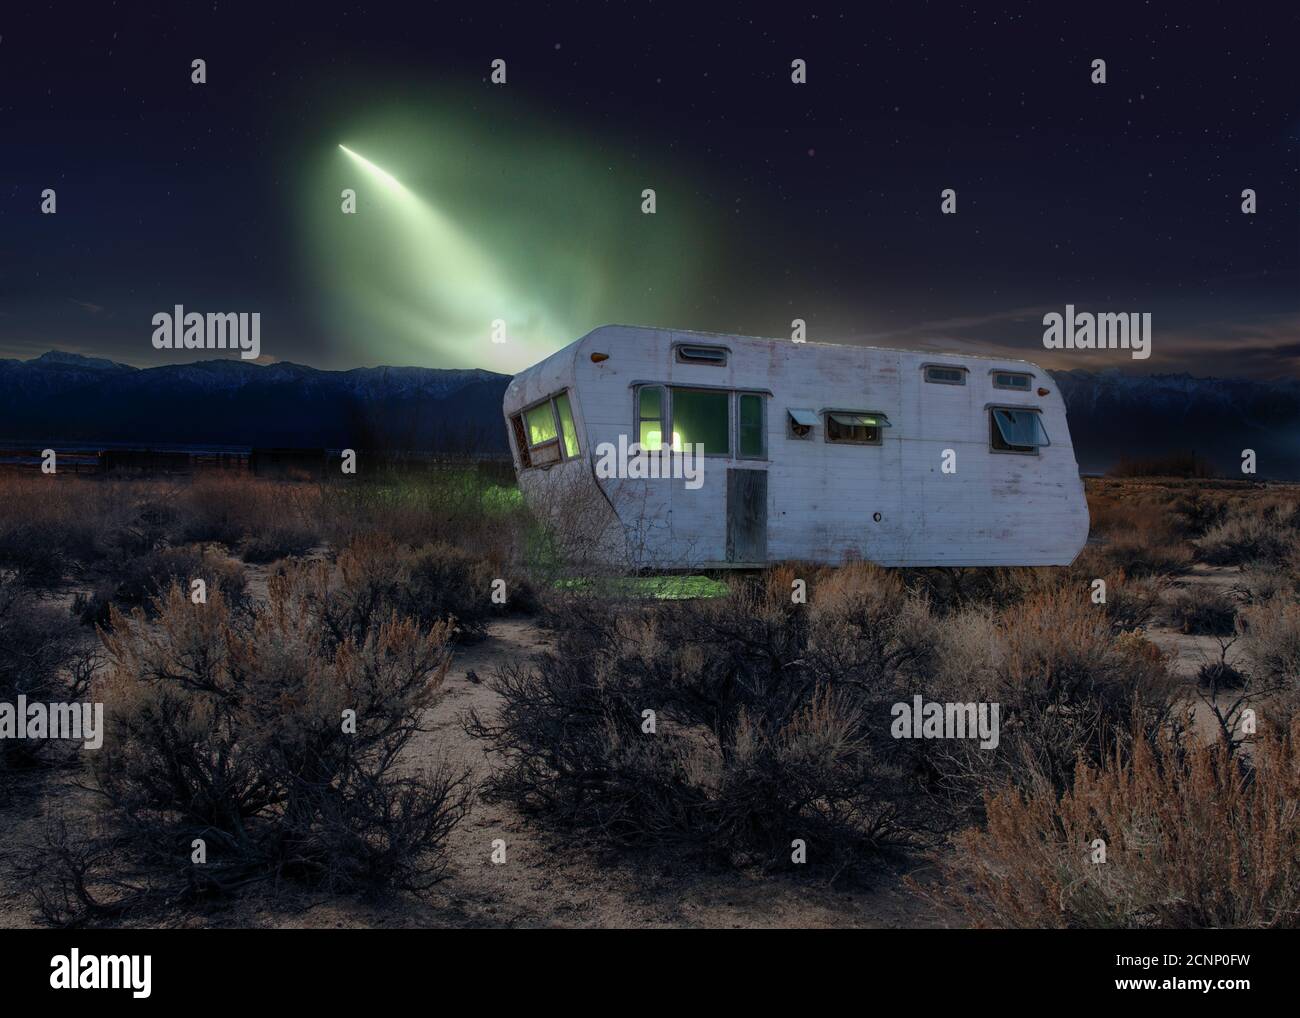 Mysterious light shining on an old abandoned caravan in the desert, USA Stock Photo